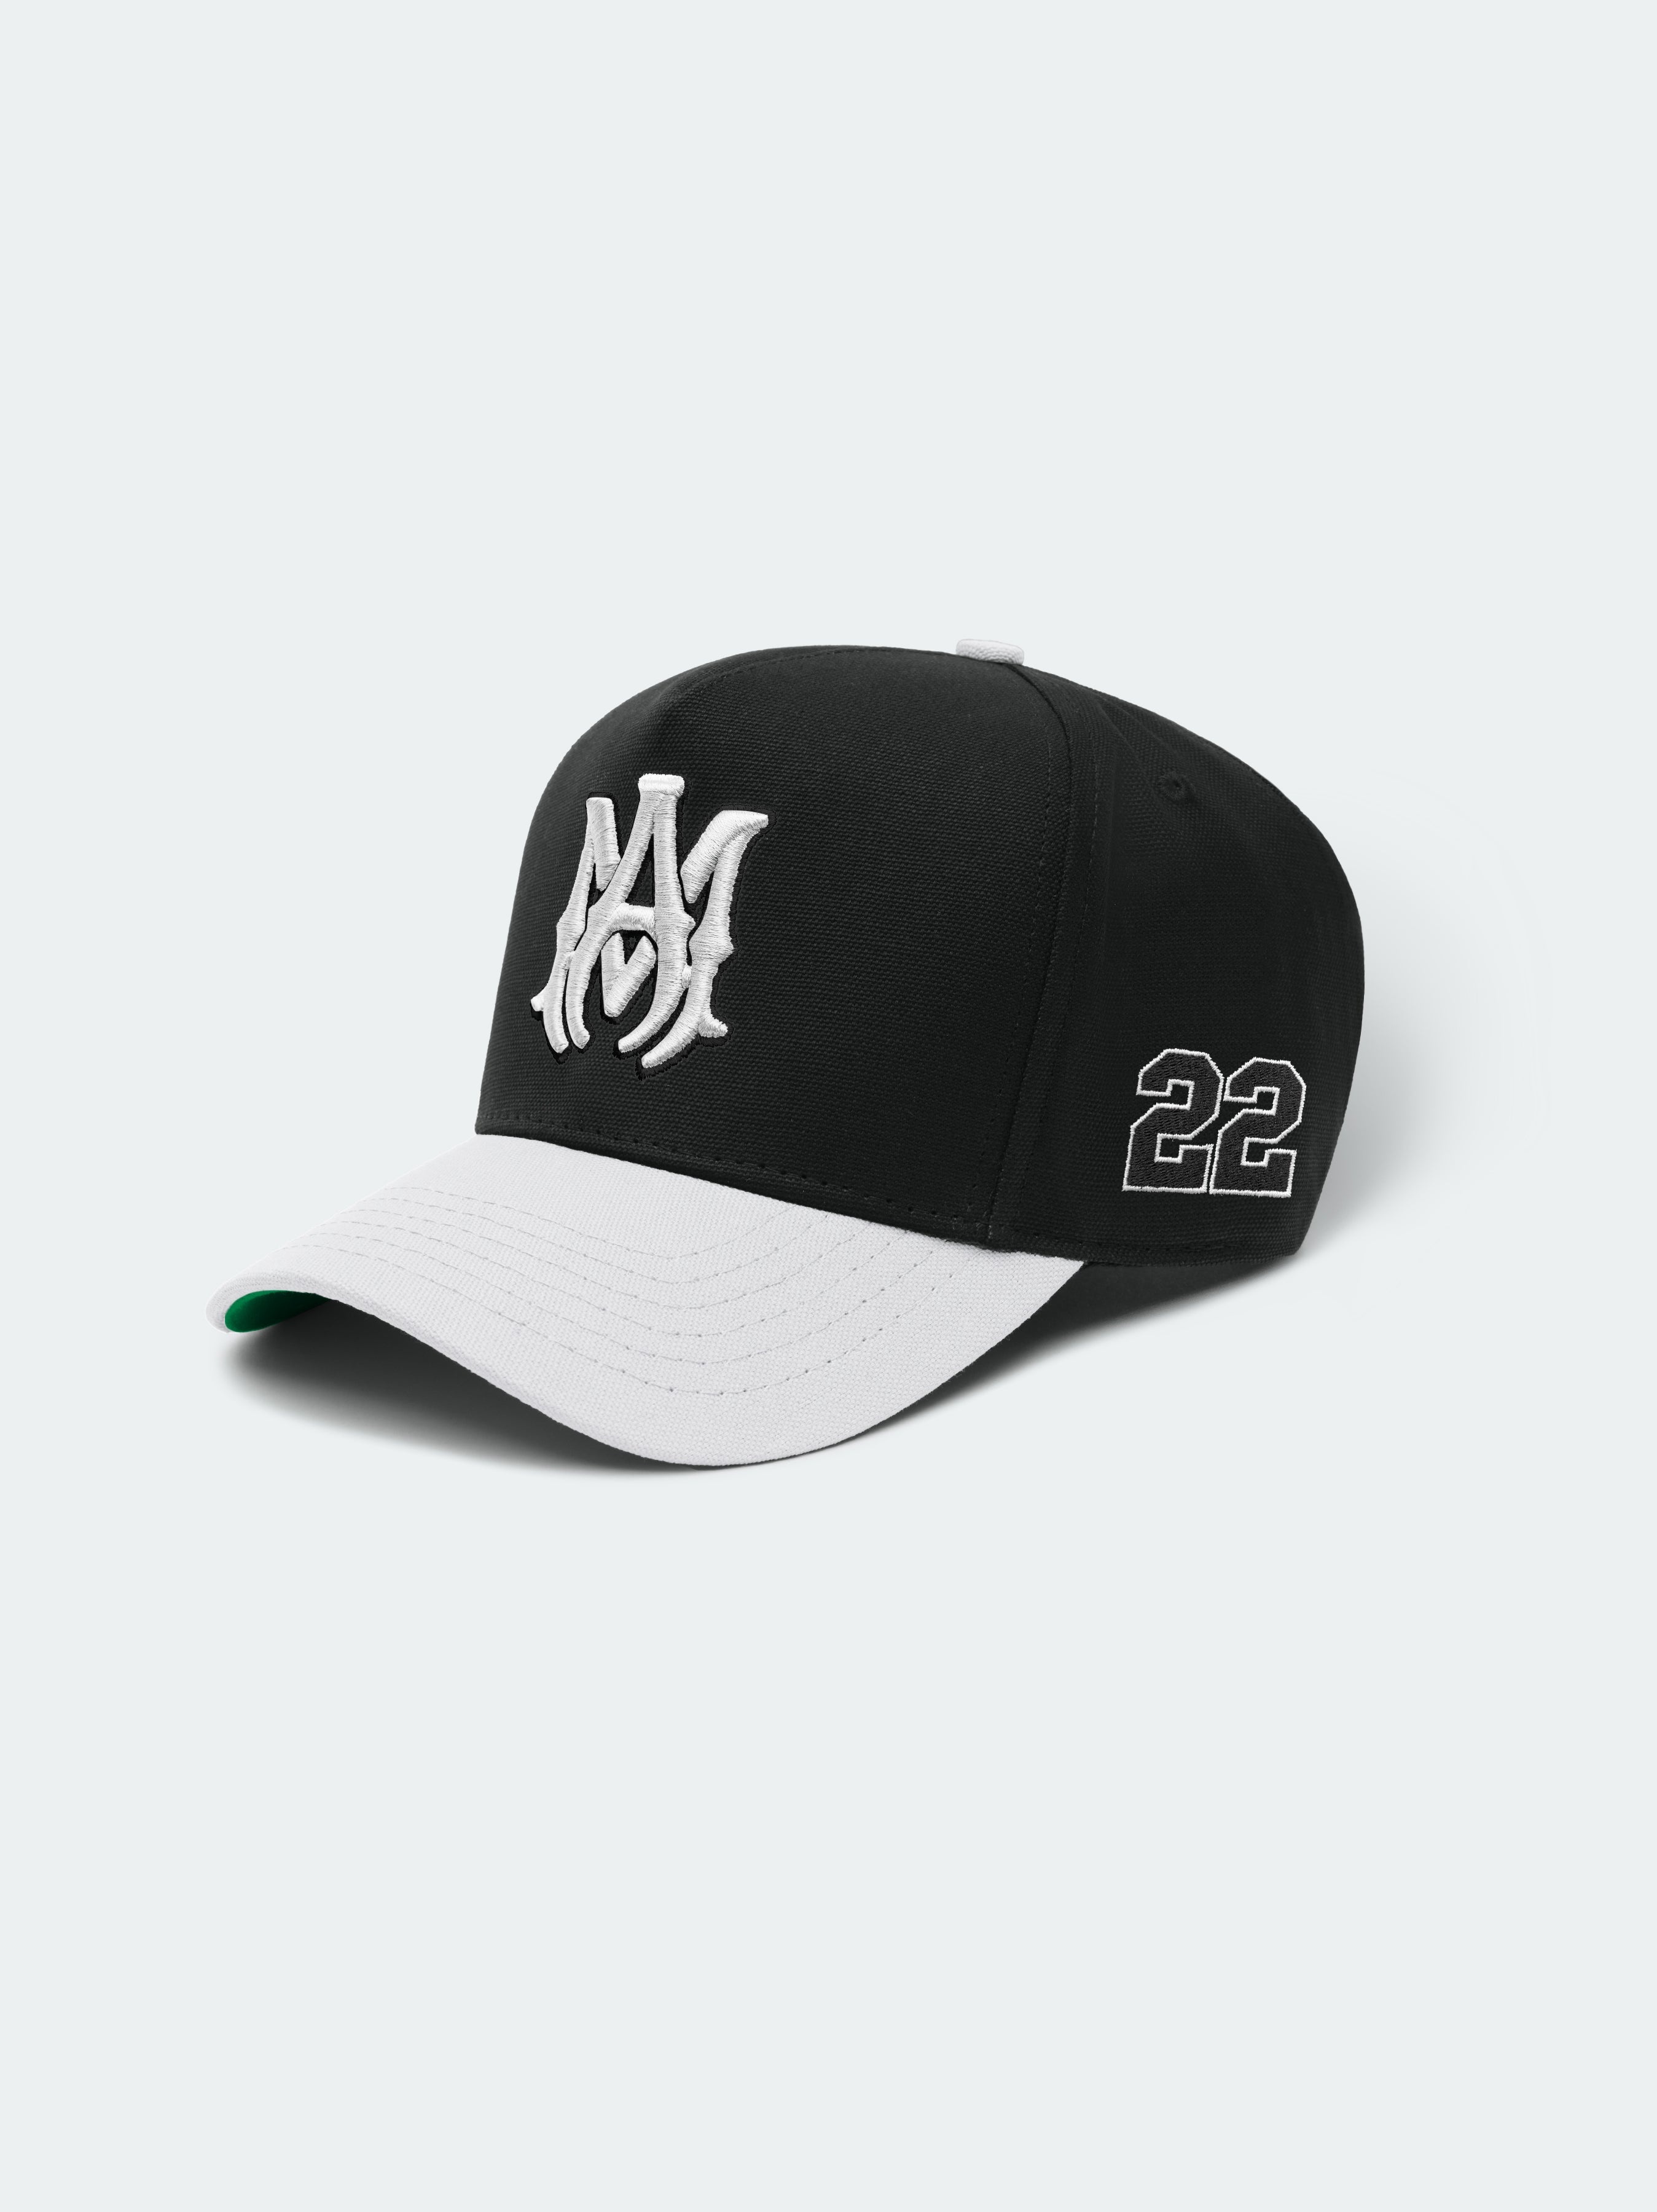 MA 22 CANVAS HAT - 3